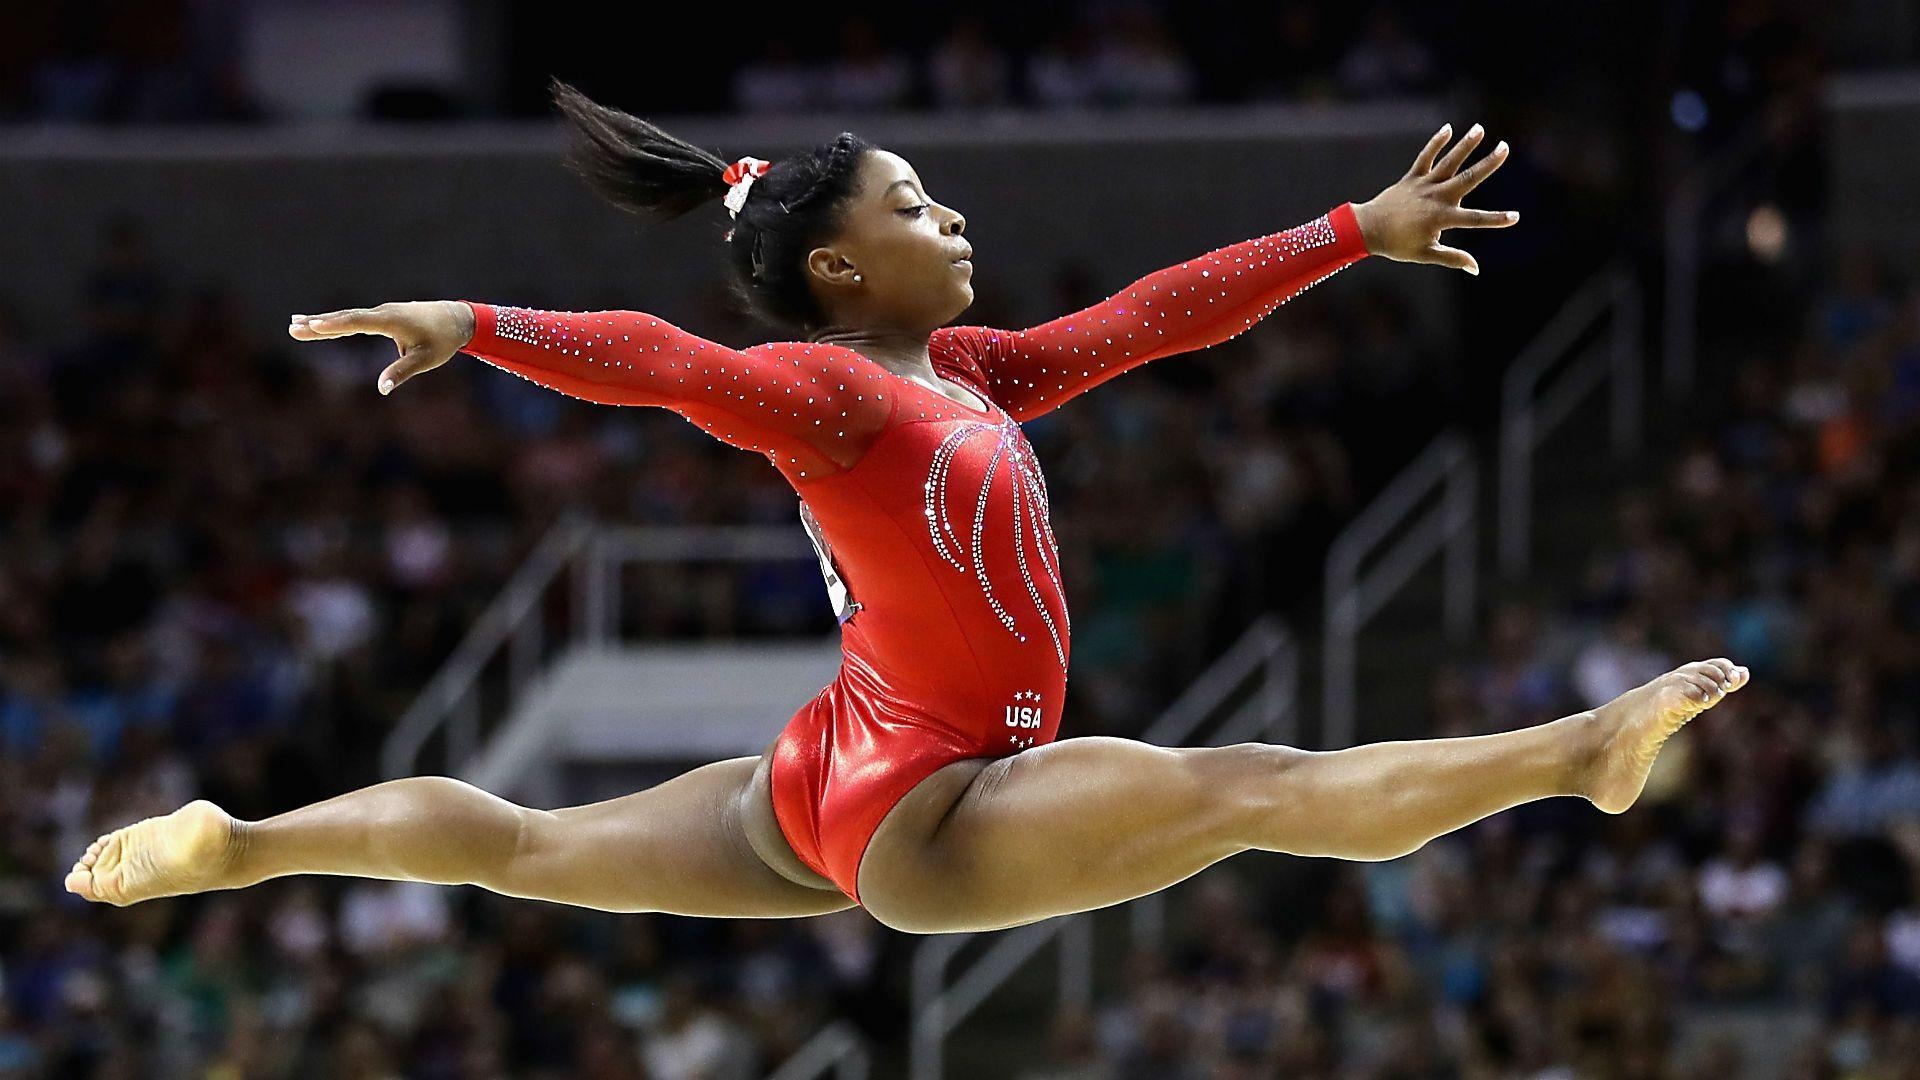 Acrobatic Sports: Simone Biles, An American artistic gymnast, Seven Olympic medals. 1920x1080 Full HD Background.